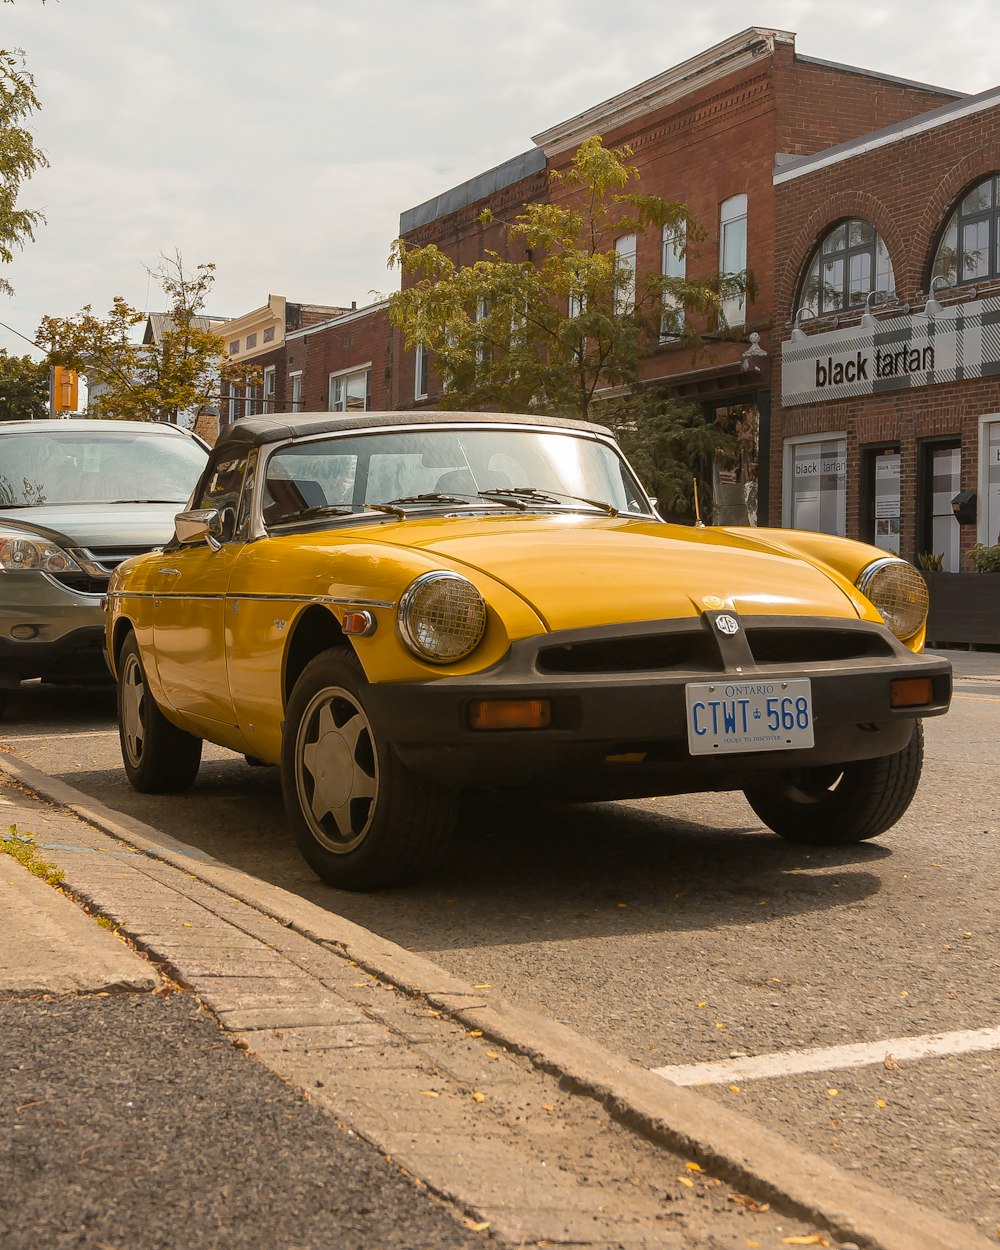 yellow and black classic car parked on sidewalk during daytime